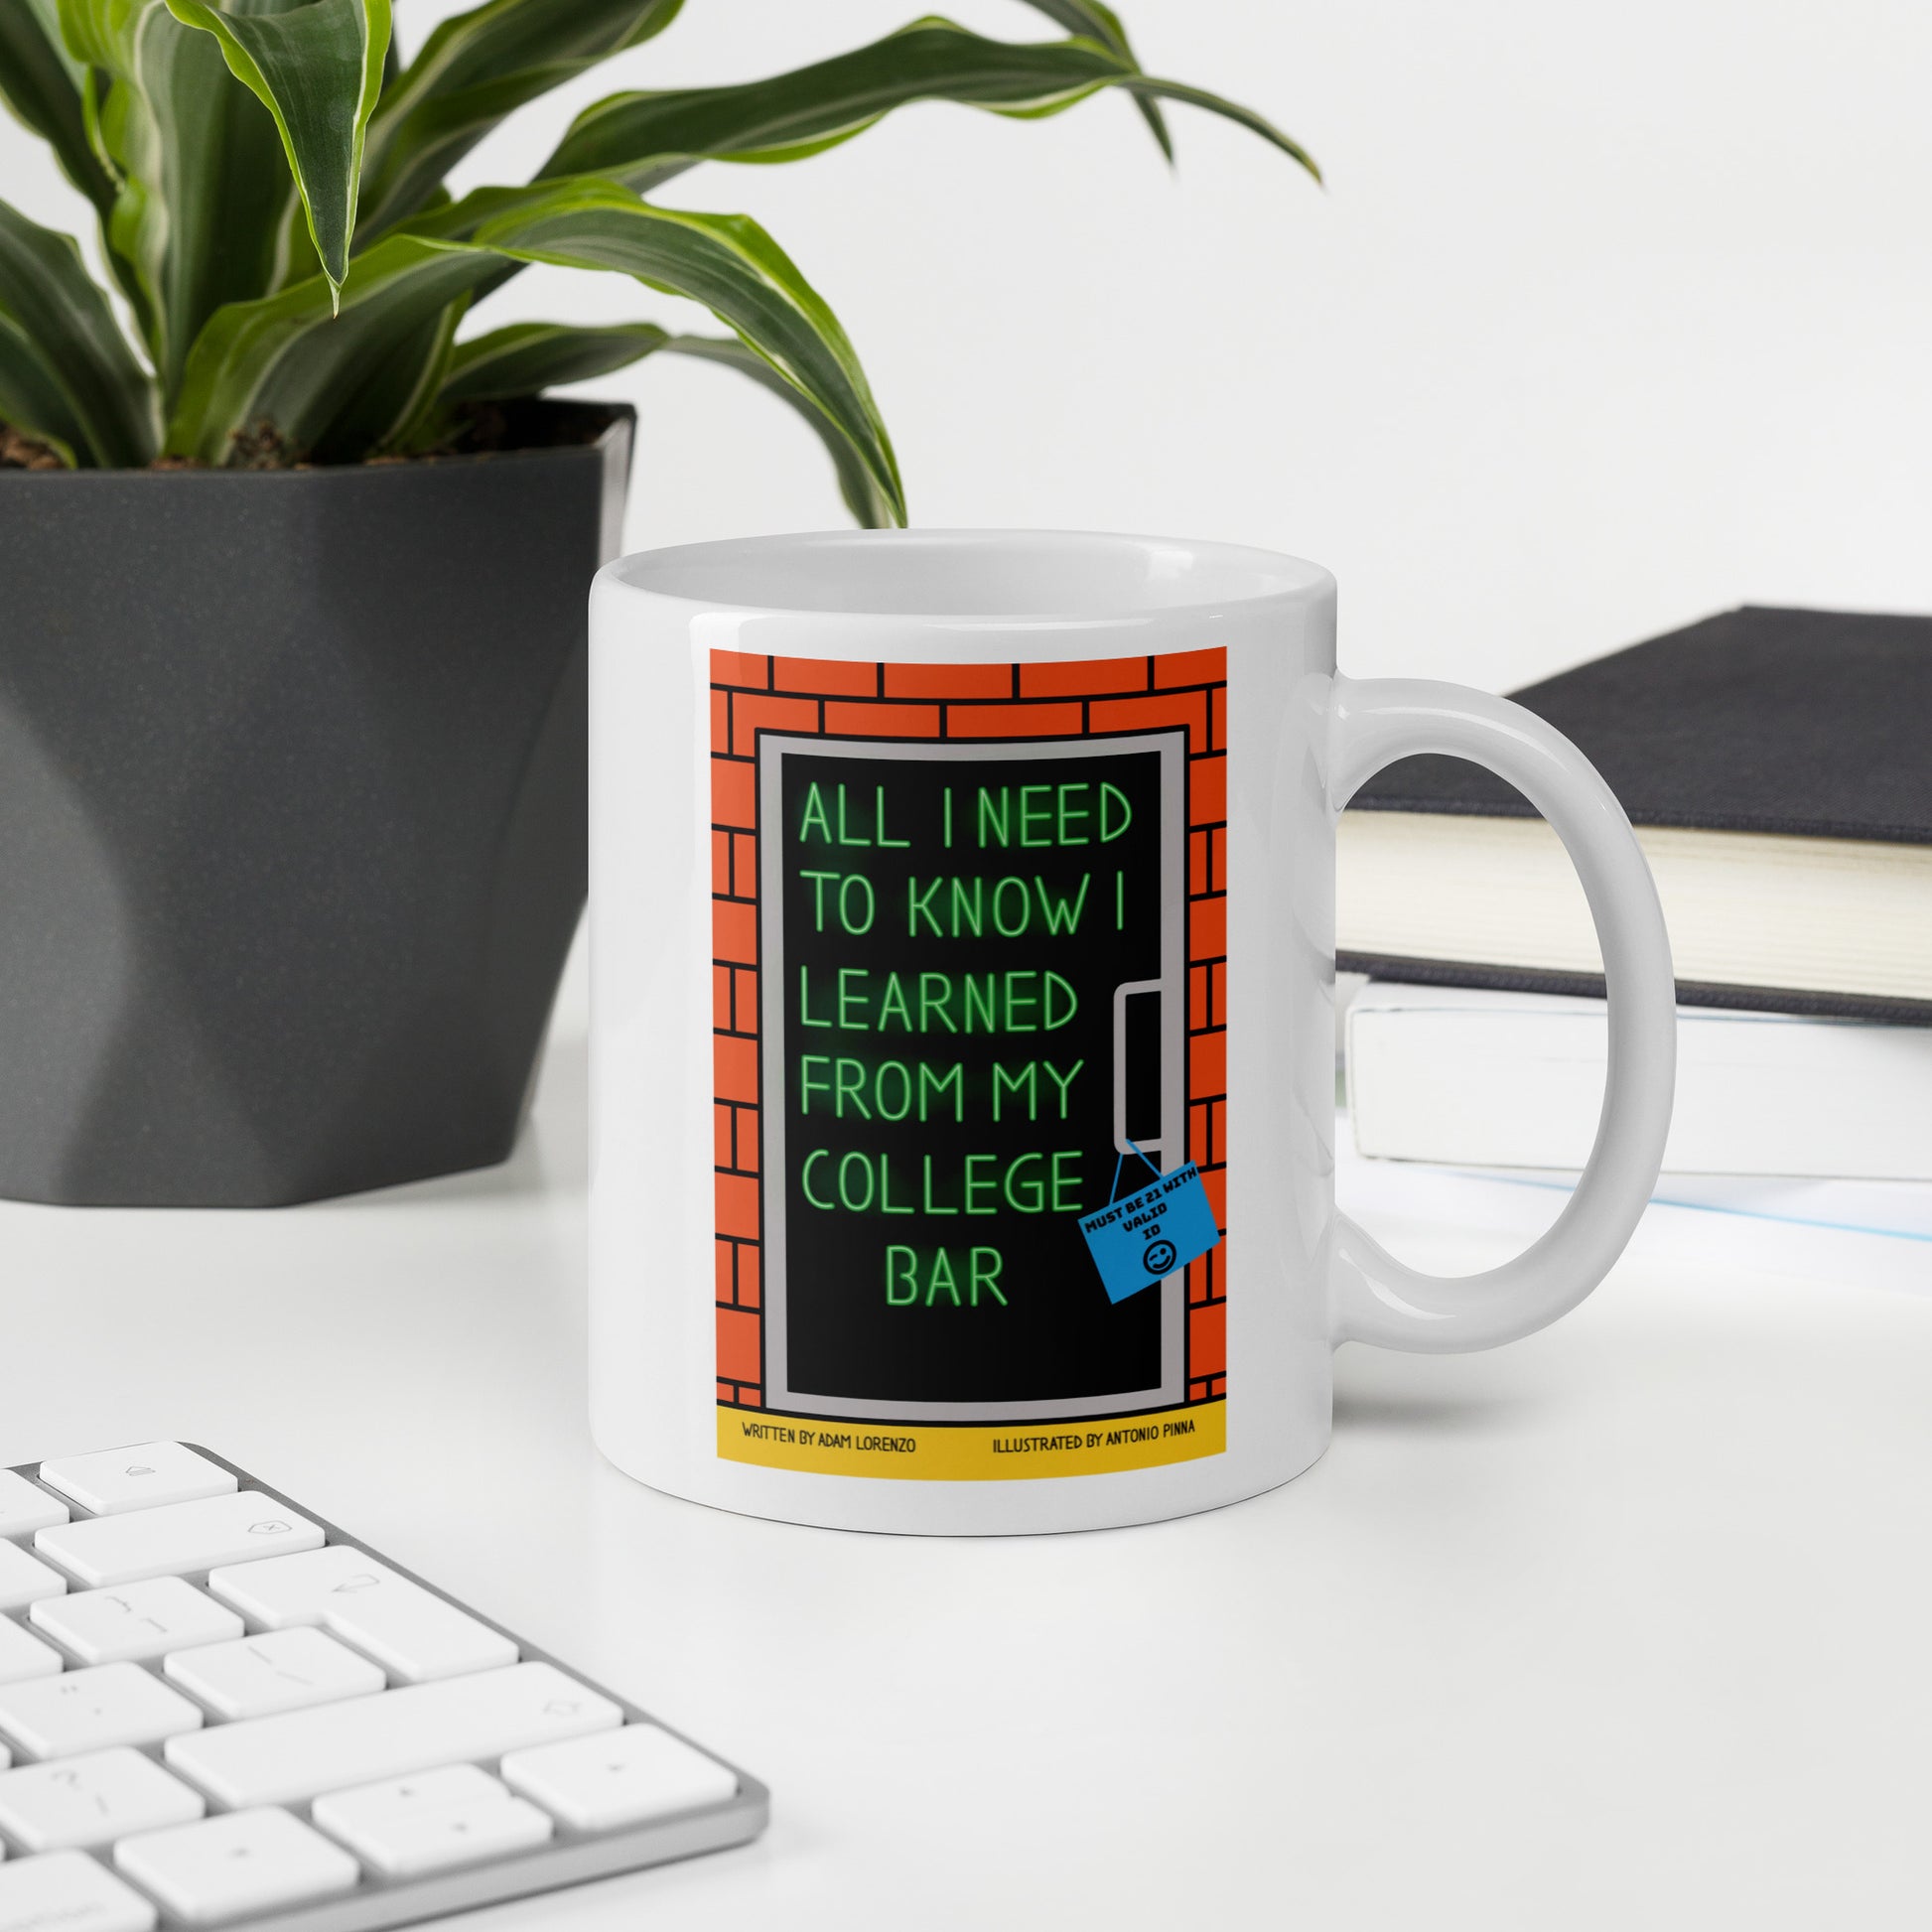 A white coffee mug with a colorful "All I Need To Know I Learned From My college Bar" graphic on both sides 